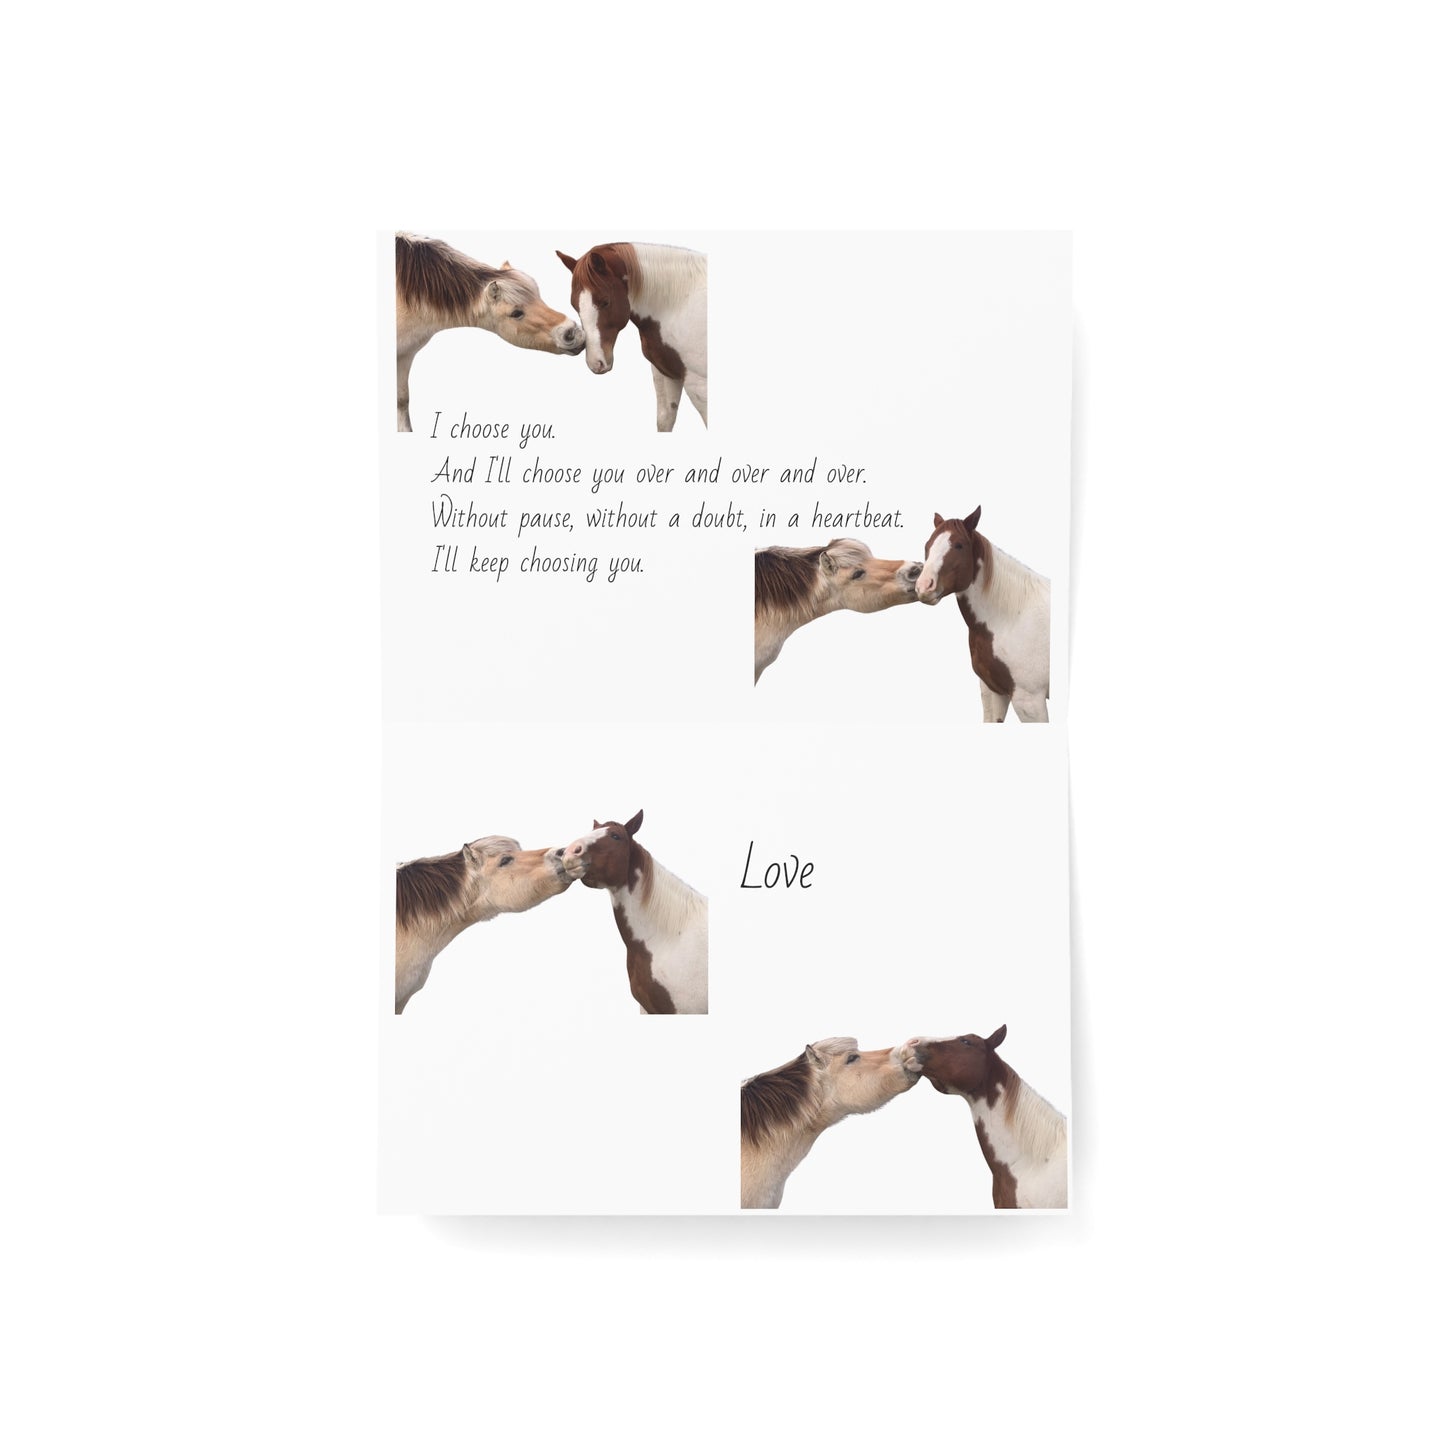 Thunder Cecil Greeting Cards (1, 10, 30, and 50pcs)